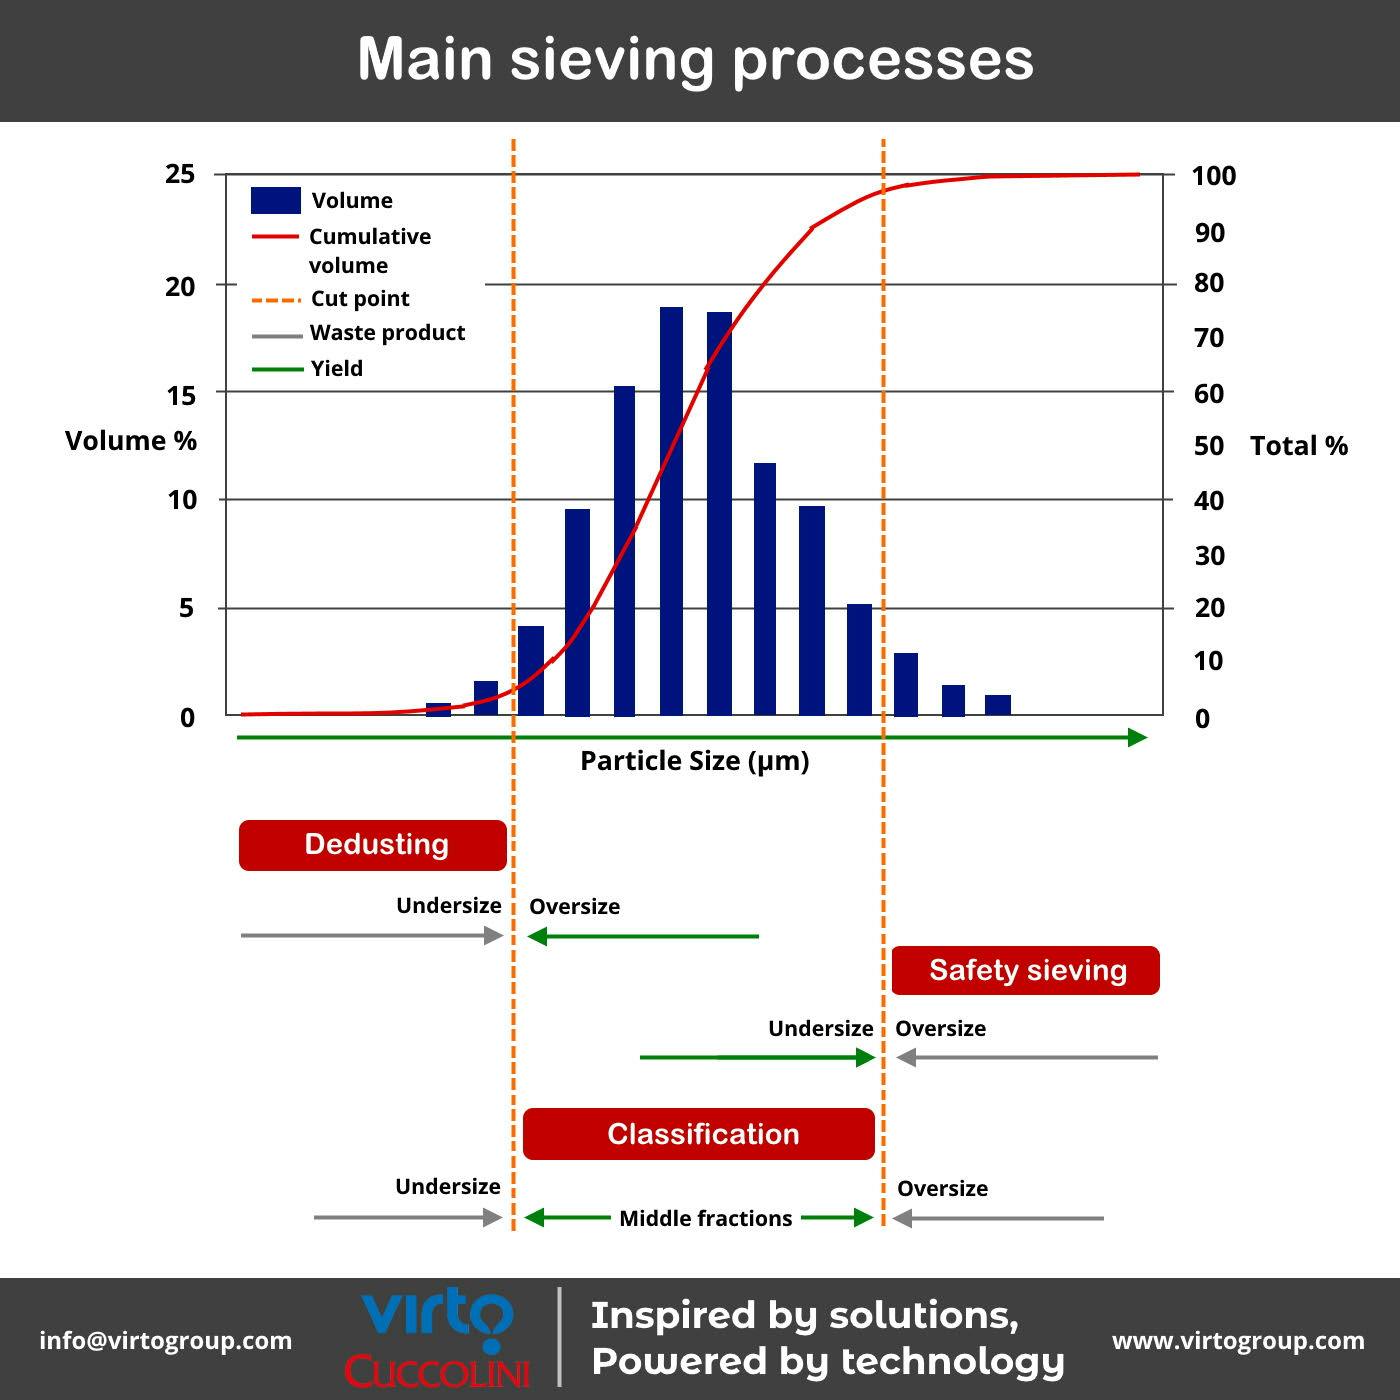 Why sieving is introduced in manufacturing processes